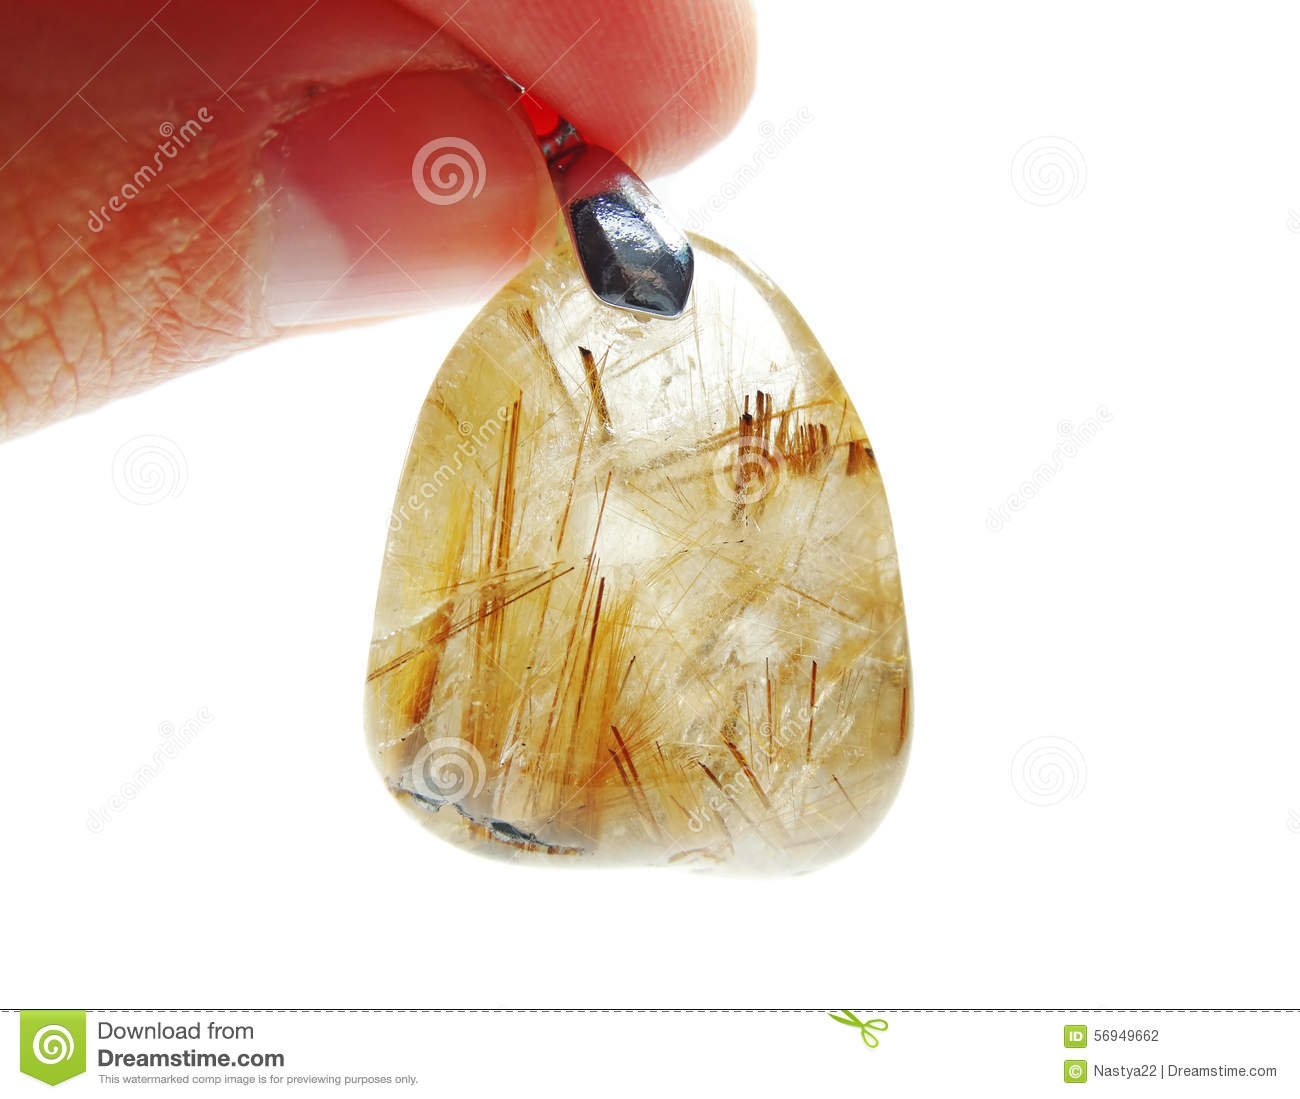 Rutilated Quartz Semigem Crystals Geological Mineral Isolated